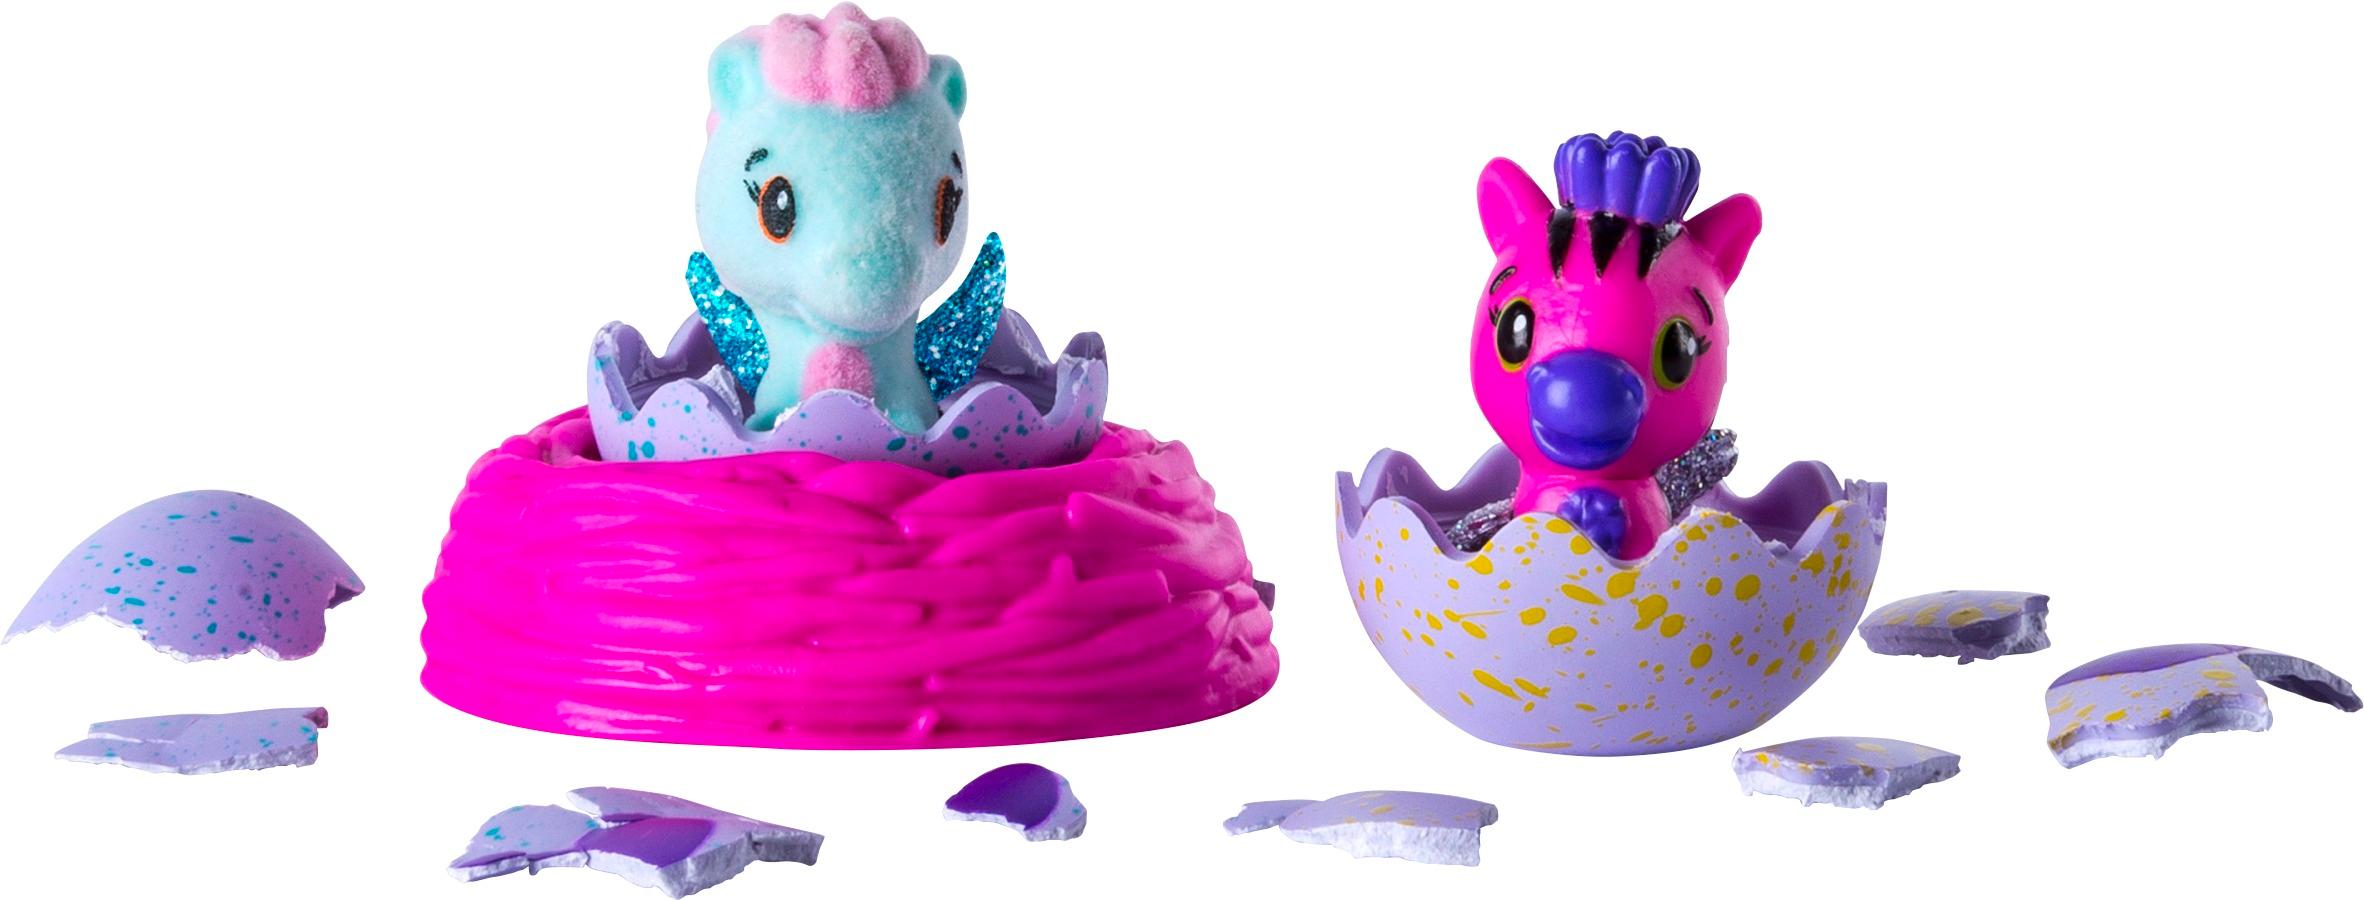 Hatchimals CollEGGtibles Family Hatchy Home Egg Playset (Styles Vary)